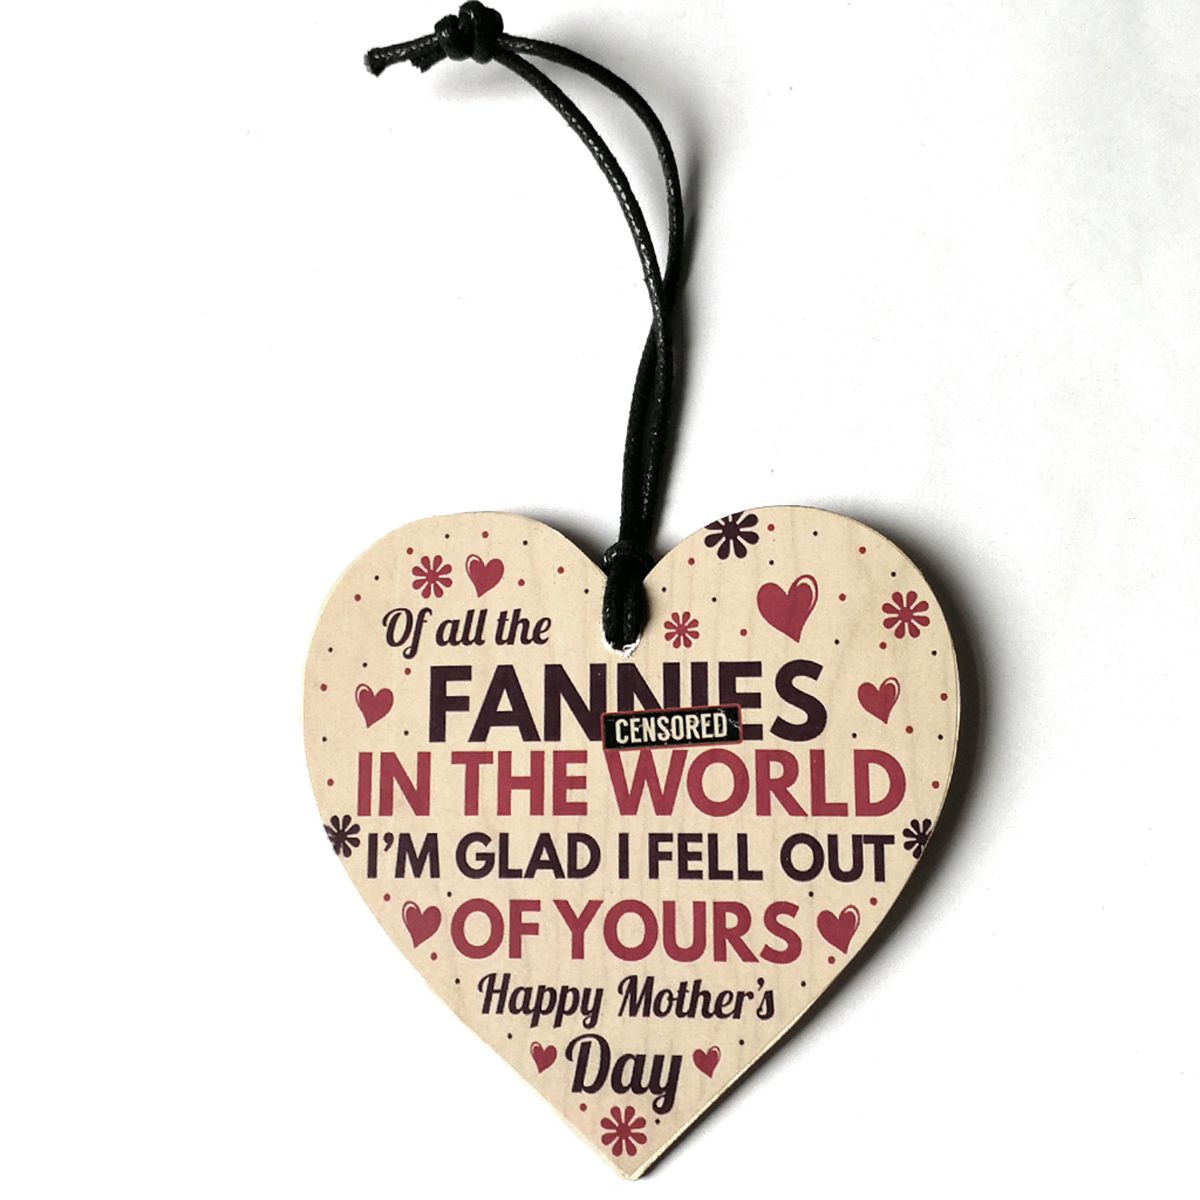 Wooden-Heart-Plaque-Funny-Rude-Mothers-Day-Heart-Gifts-Novelty-Daughter-Son-Decorations-1456823